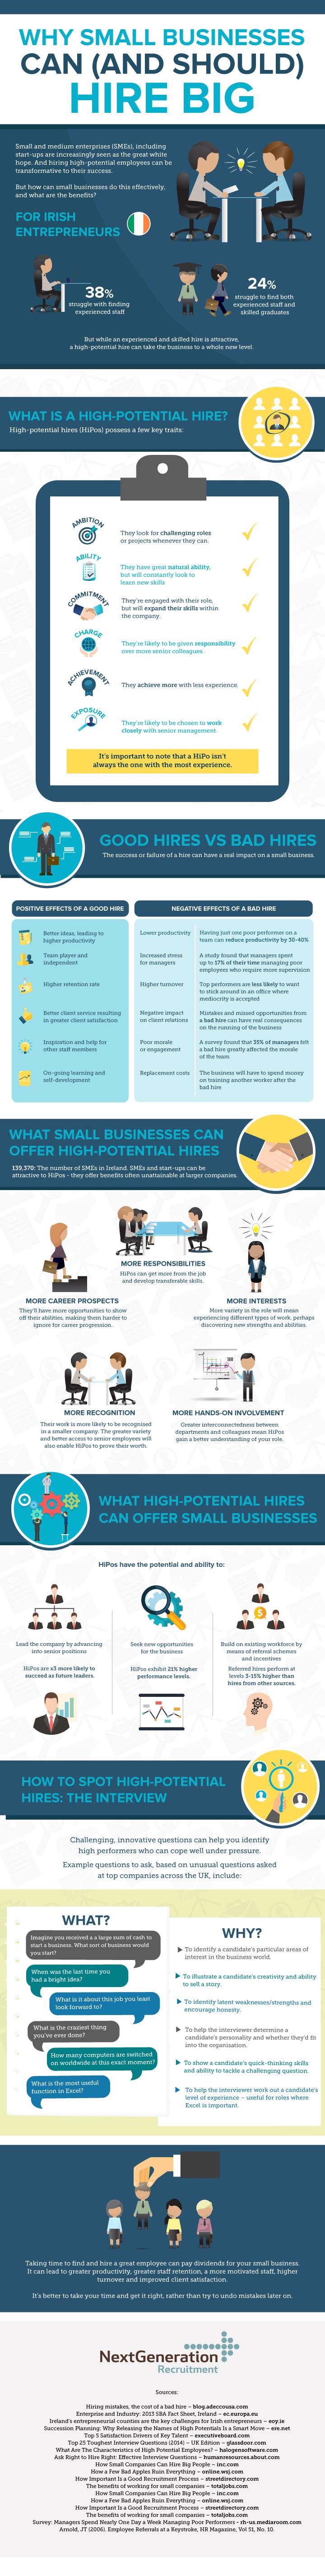 Why-Small-Businesses-Can-and-Should-Hire-Big